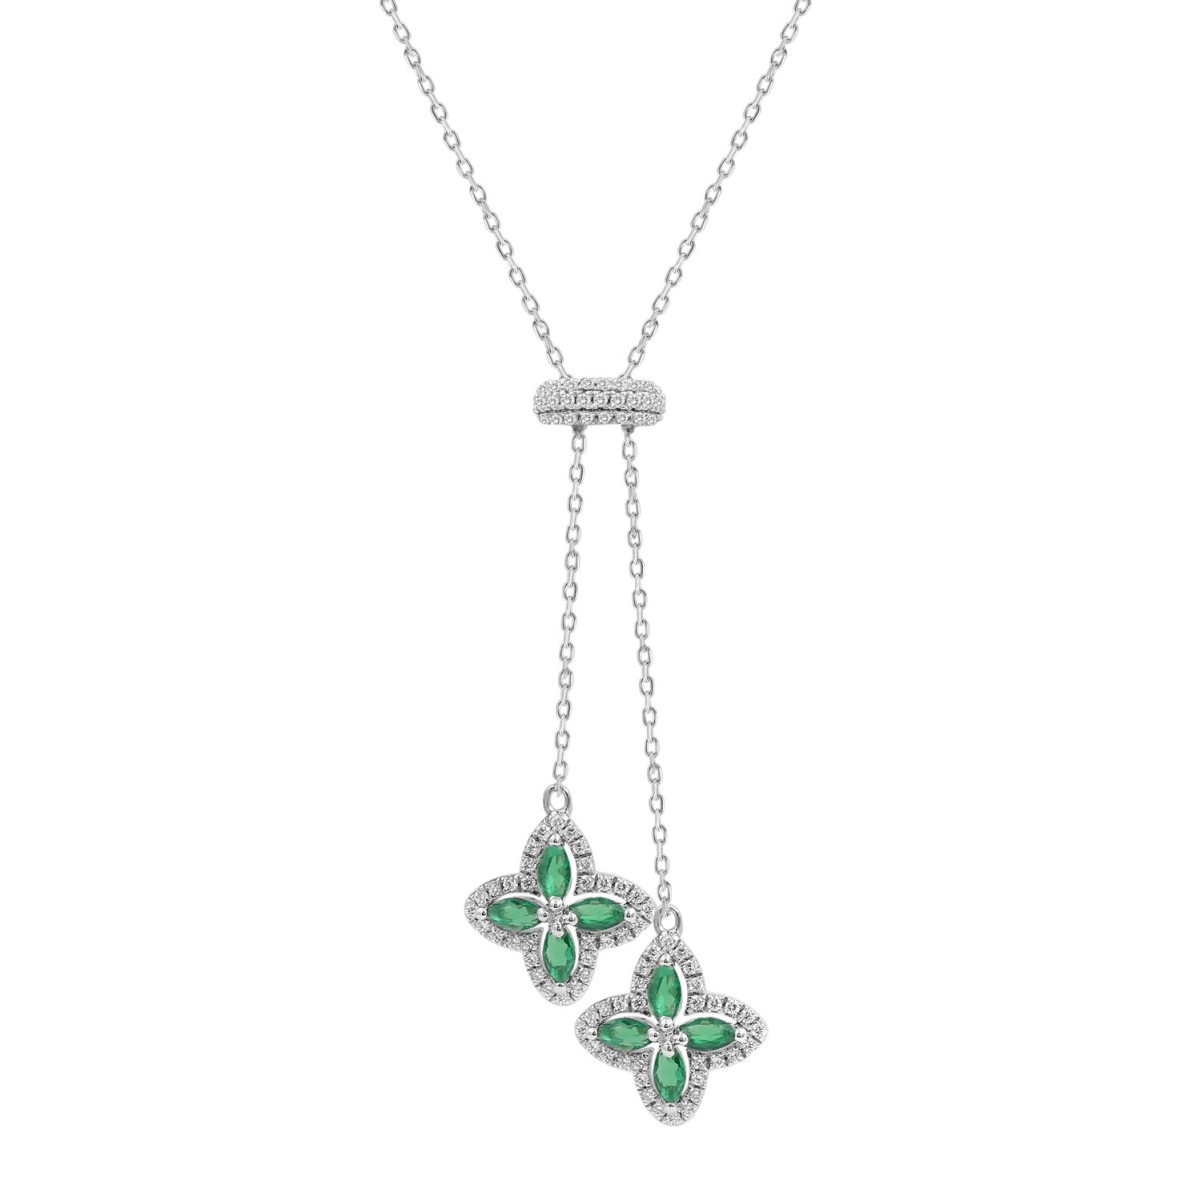 18K WHITE GOLD 1 1/3CT ROUND/MARQUISE DIAMOND LADIES NECKLACE(COLOR STONE MARQUISE GREEN EMERALD DIAMOND 7/8CT)